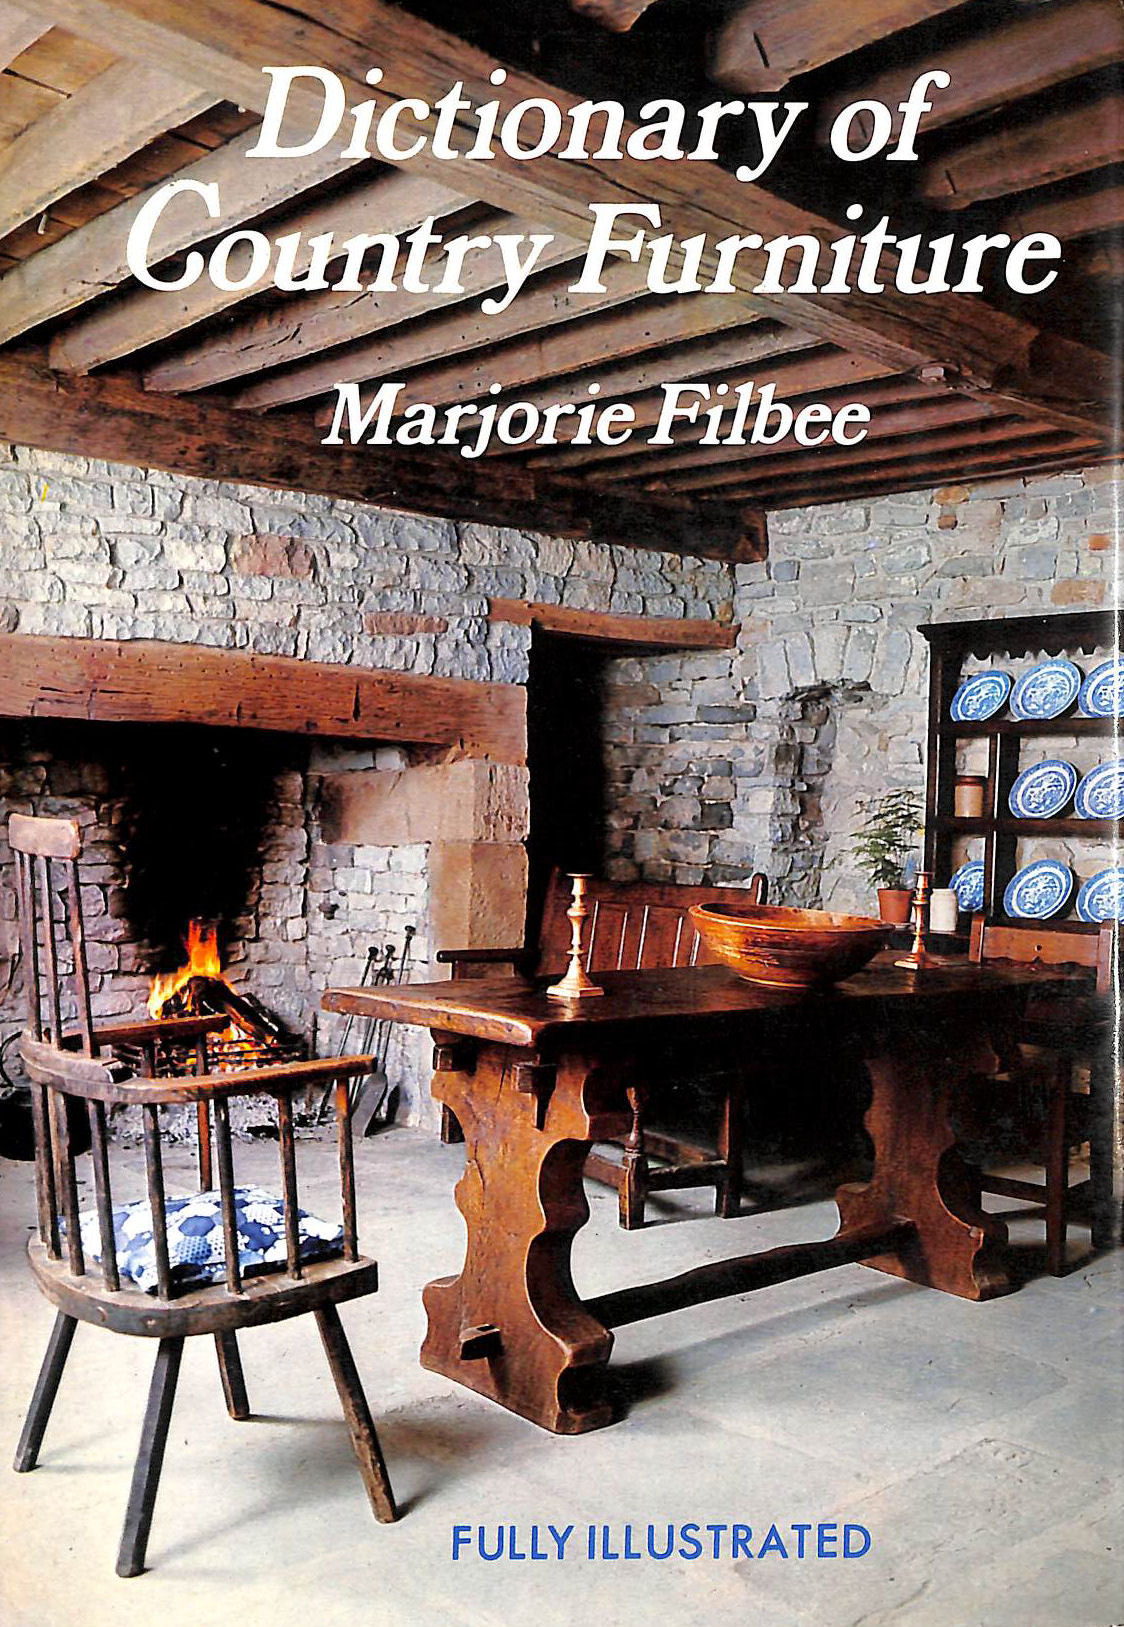 FILBEE, MARJORIE - Dictionary Of Country Furniture